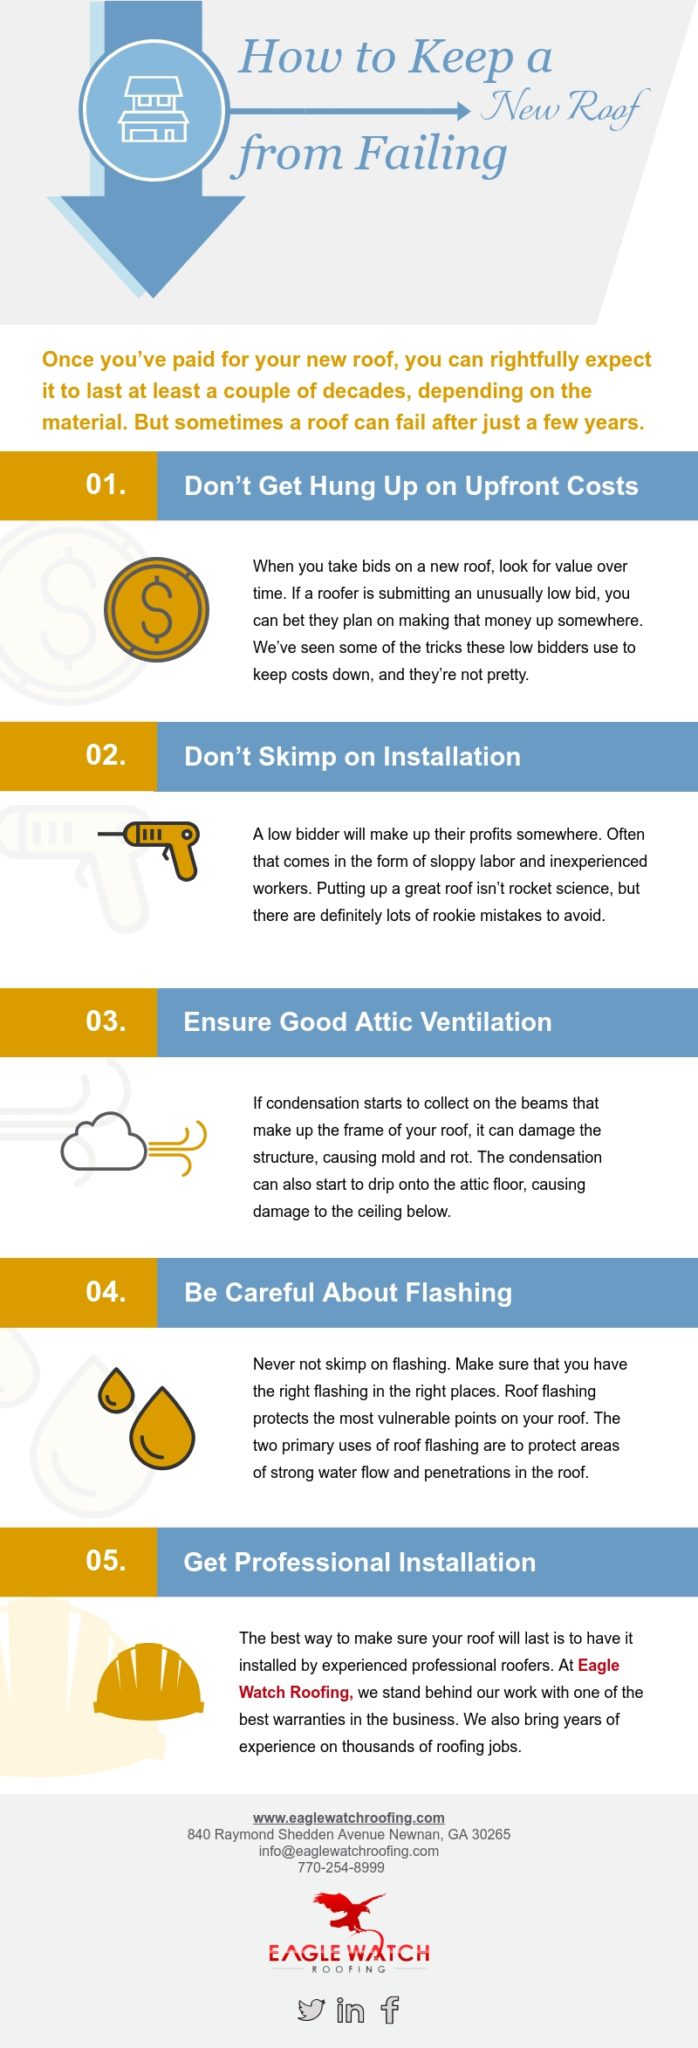 How to Keep a New Roof from Failing [infographic]